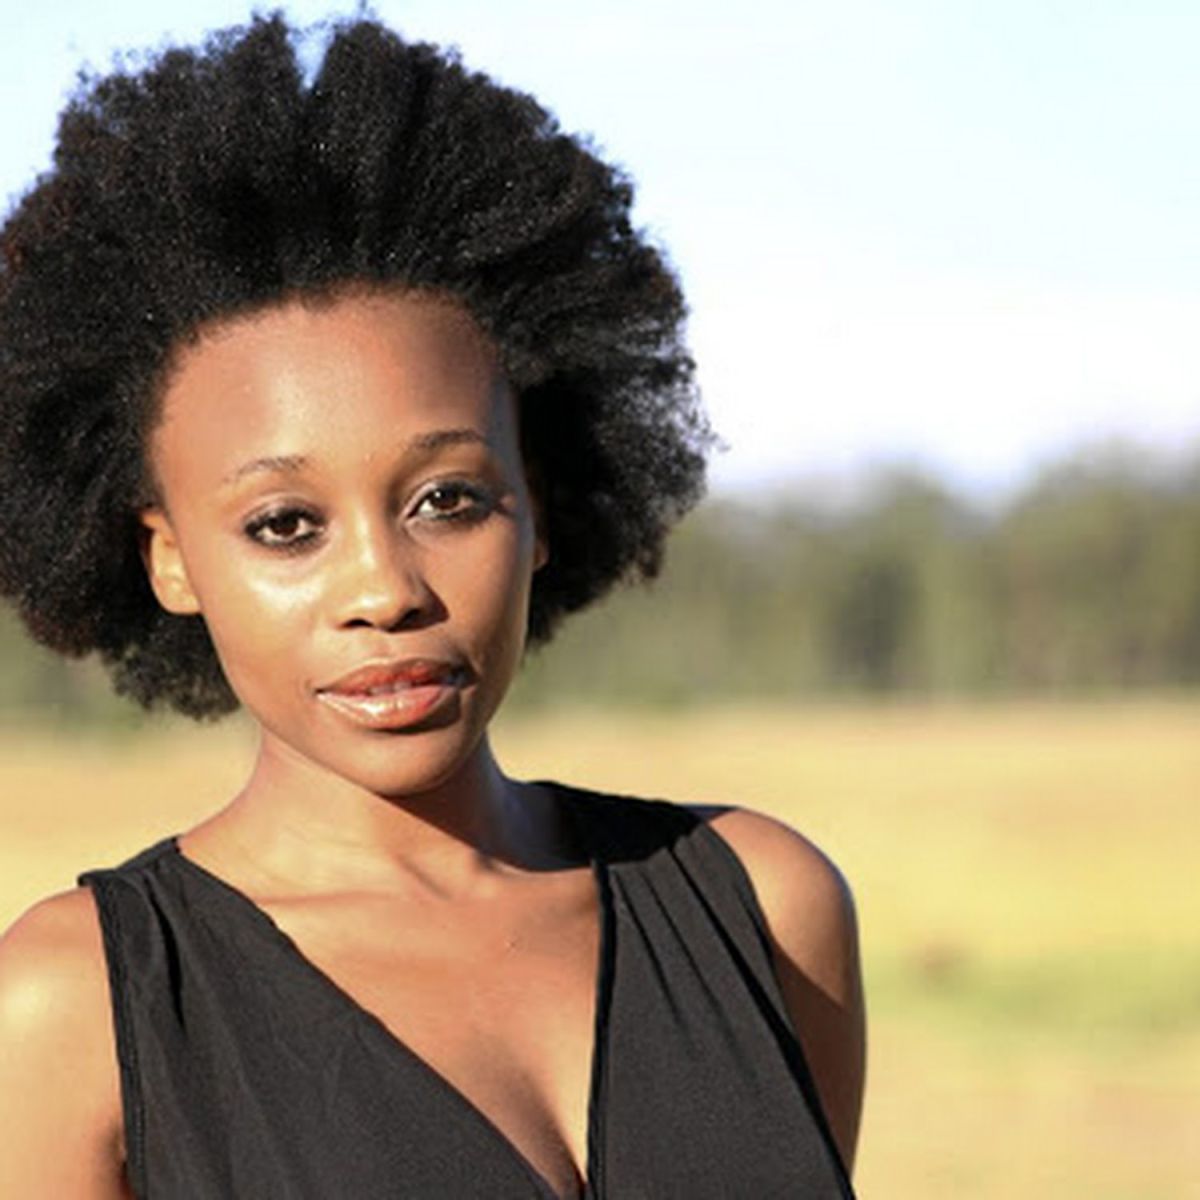 Didintle Khunou Joins The Cast Of &Quot;Generations: The Legacy&Quot; 4